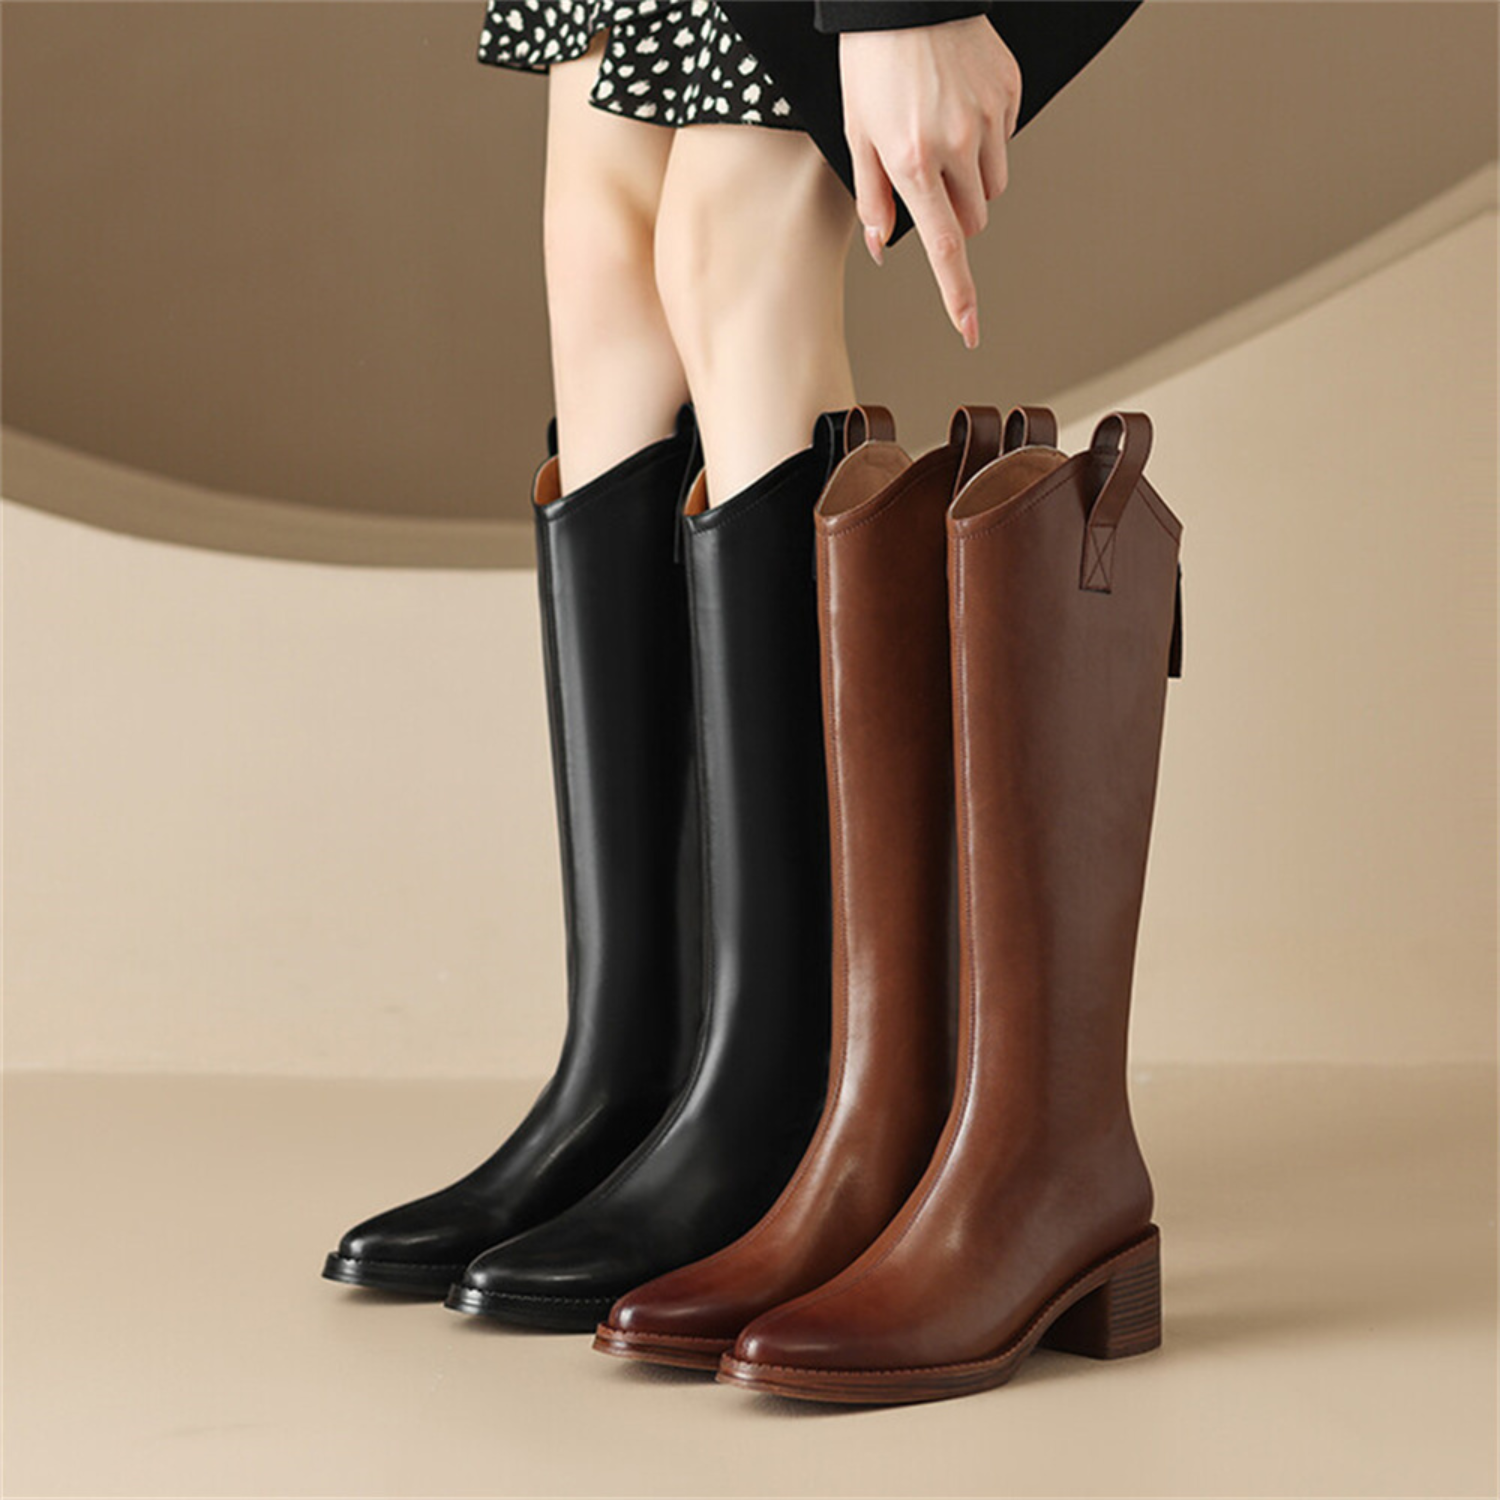 Meotina INS Women Genuine Leather Riding Boots Med Heel Round Toe Shoes  Thick Heel Knee High Boots Lady Autumn Winter 42 Brown